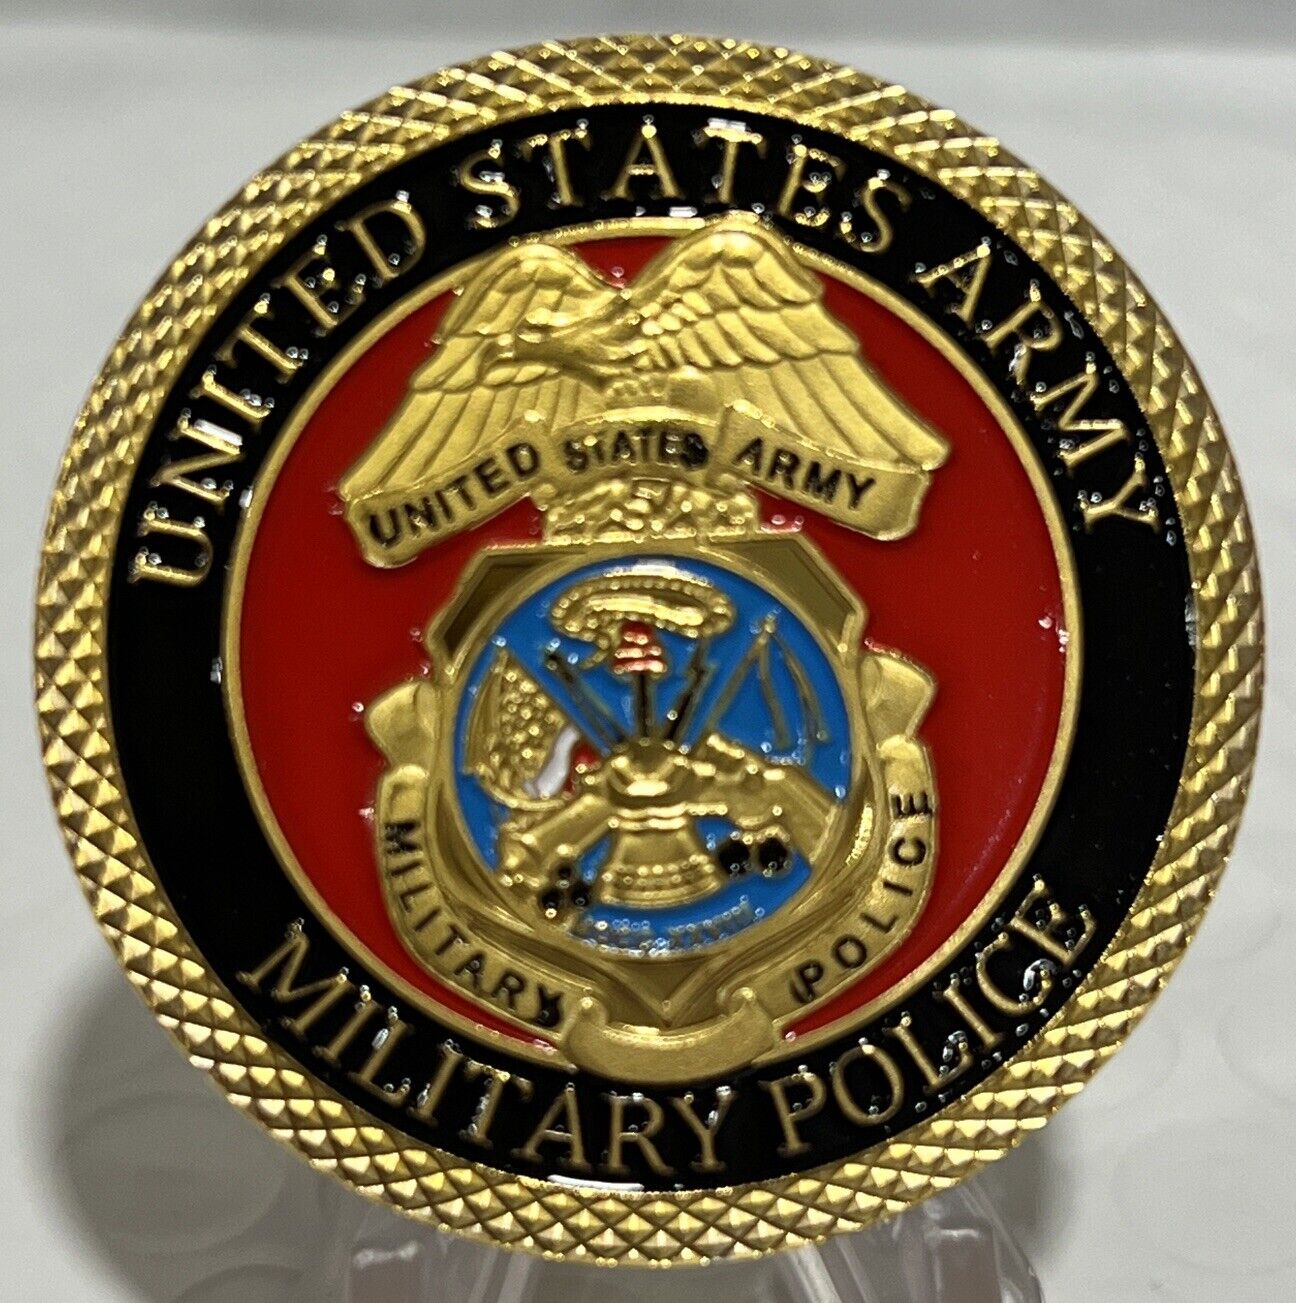 * RARE US ARMY MILITARY POLICE. ARMY STRONG SINCE 1775. NEW-ARMY CHALLENGE COIN